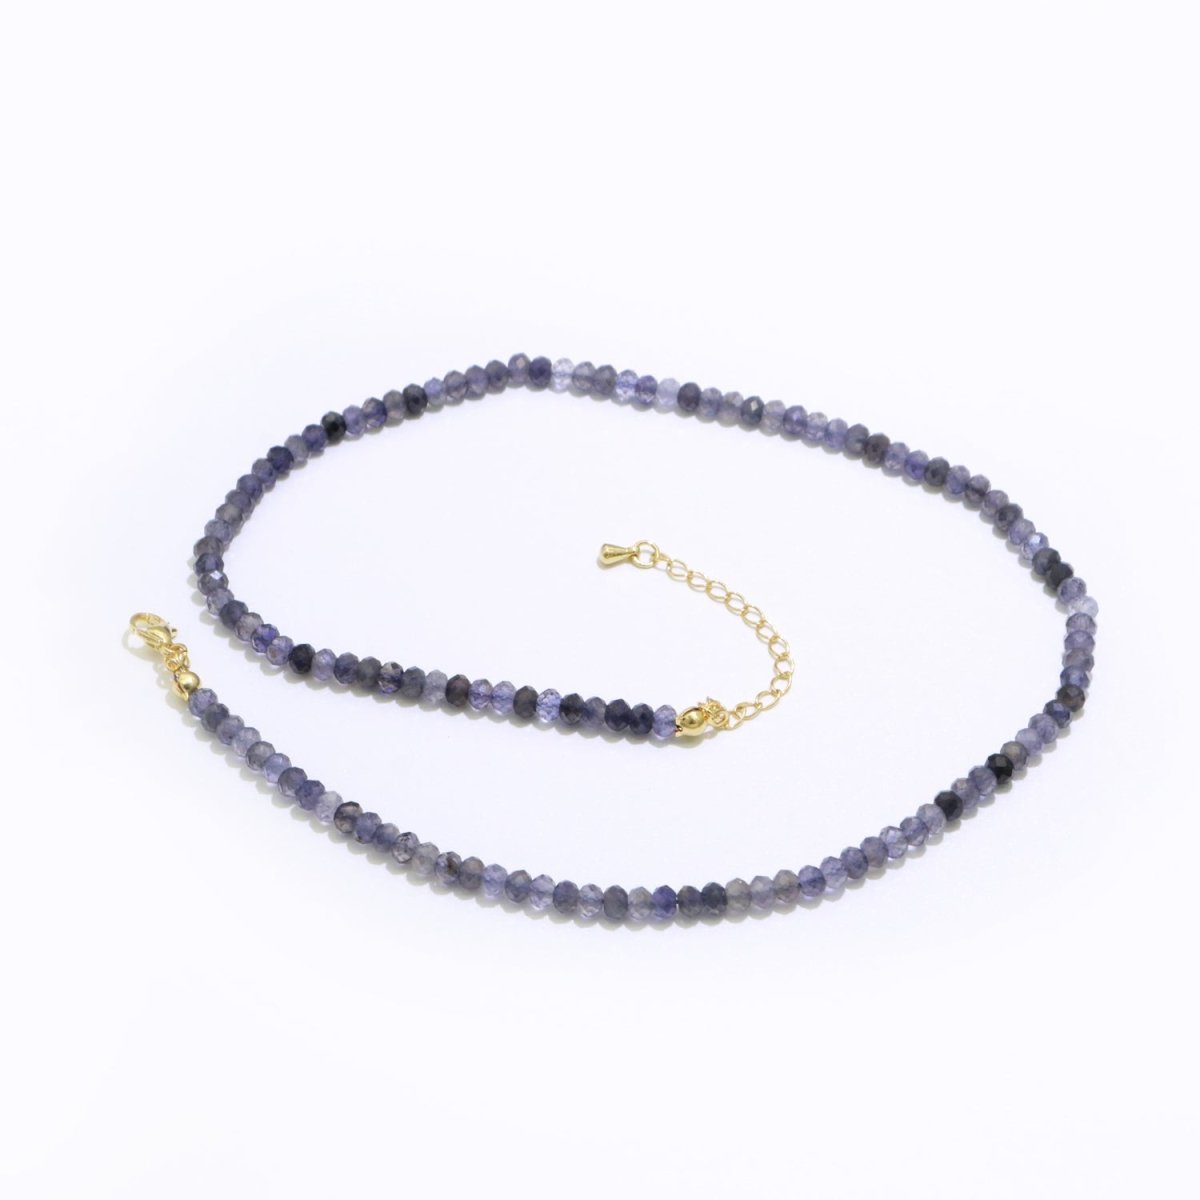 Blue Zircon stone bead Necklace Faceted 3.3mm Roundel Shape bead gorgeous natural Dark Purple gemstone Necklace | WA-257 Clearance Pricing - DLUXCA